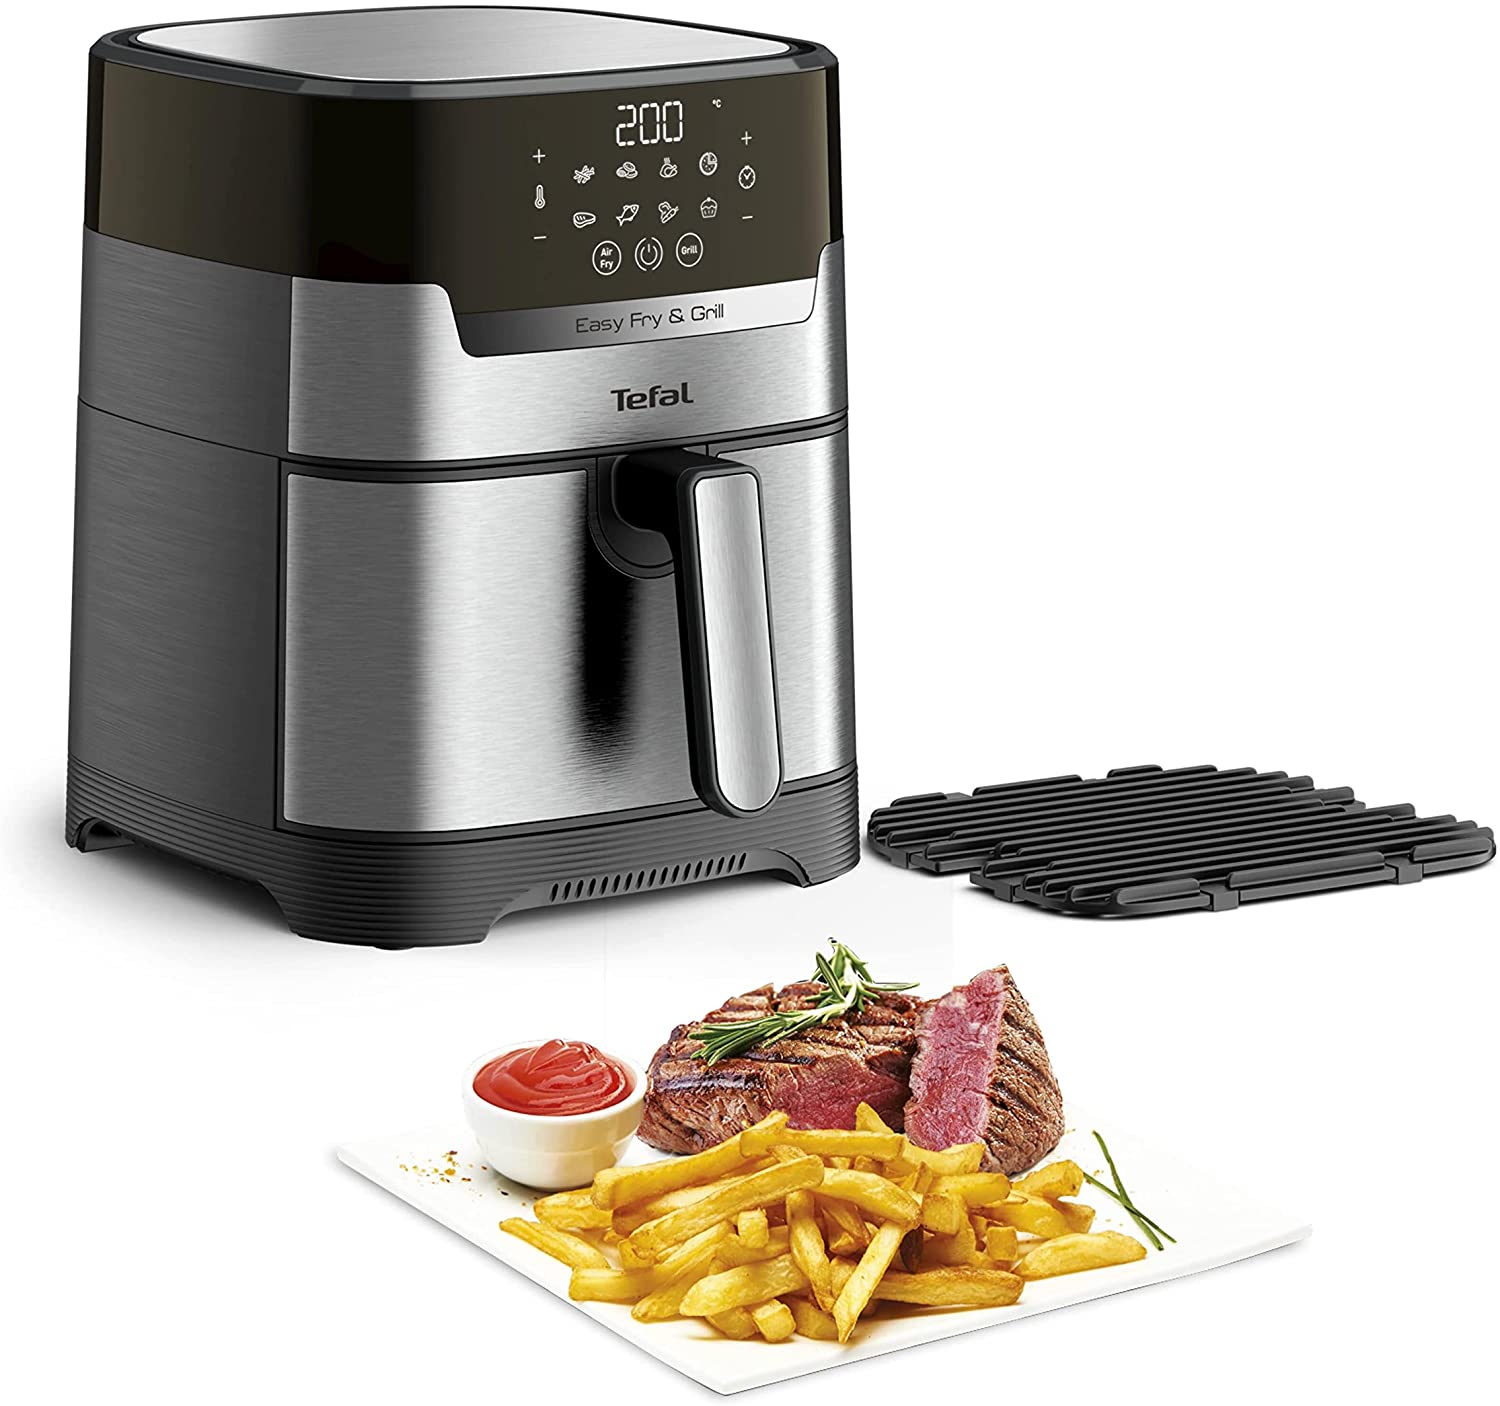 Tefal EY505D Easy Fry & Grill Deluxe Hot Air Fryer | 2-in-1 Technology (Hot Air Fryer and Grill) | Capacity: 4.2 Litres | 8 Automatic Programmes | Timer | Stainless Steel